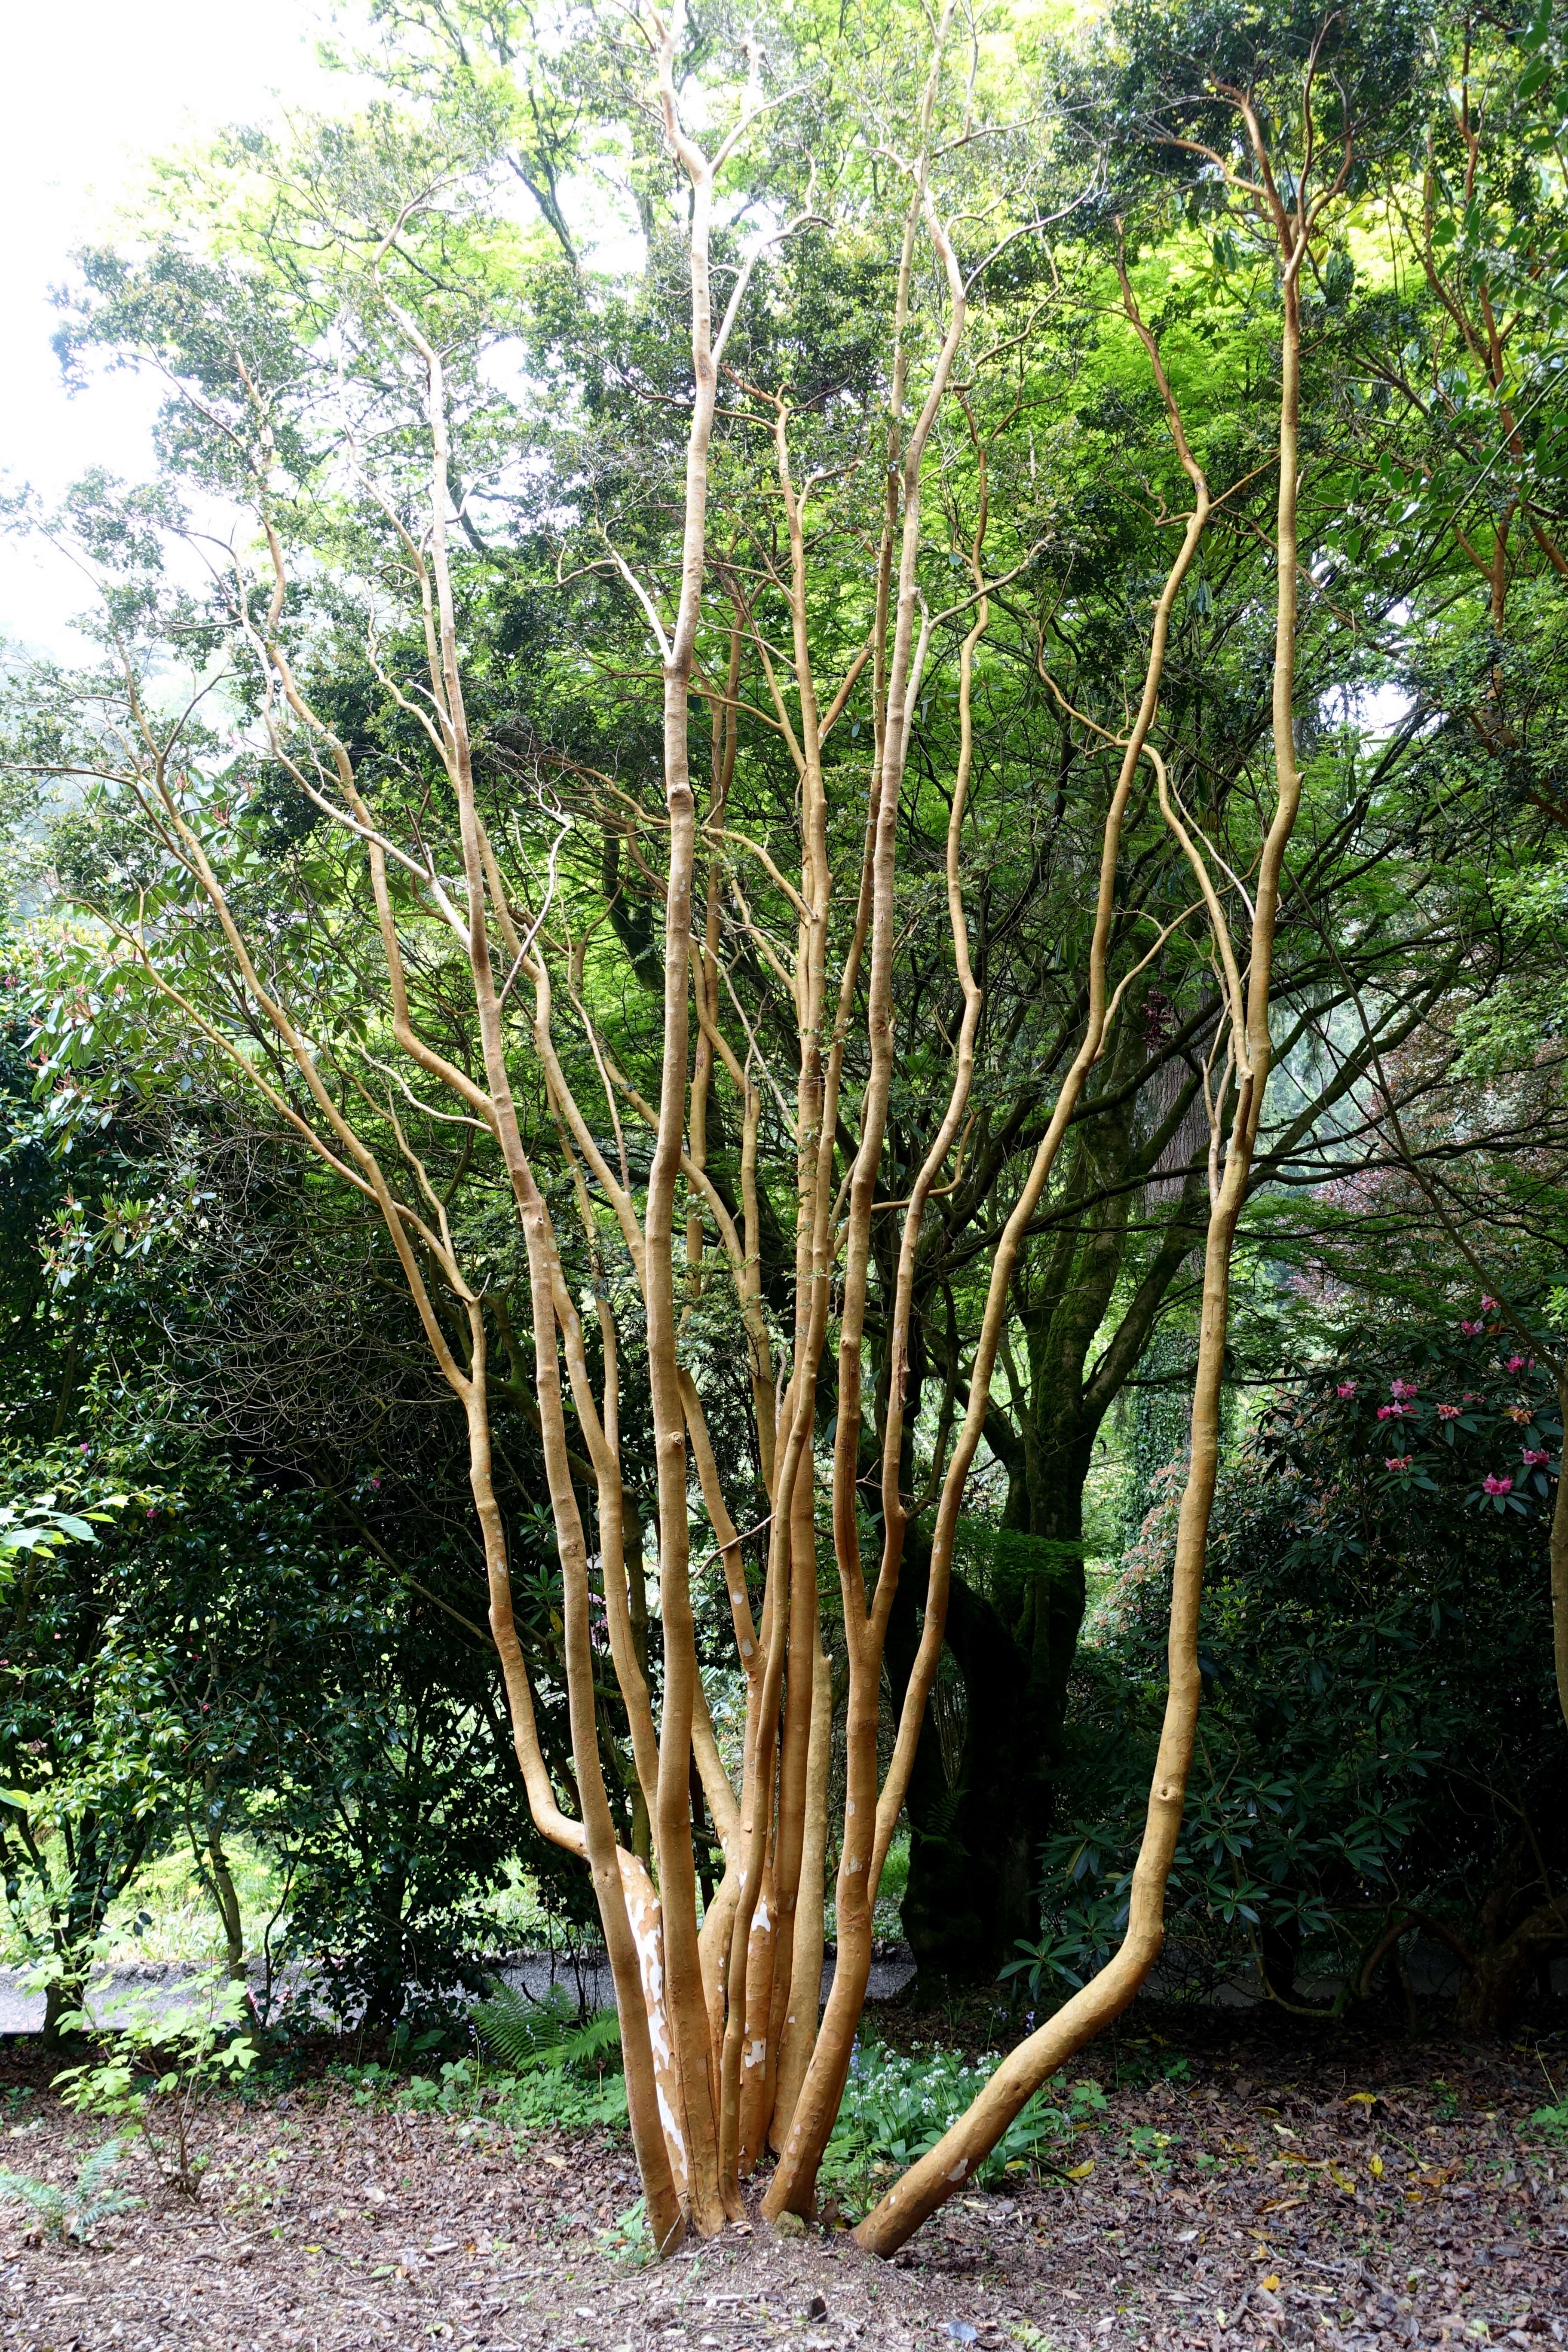 Image of Chilean Myrtle